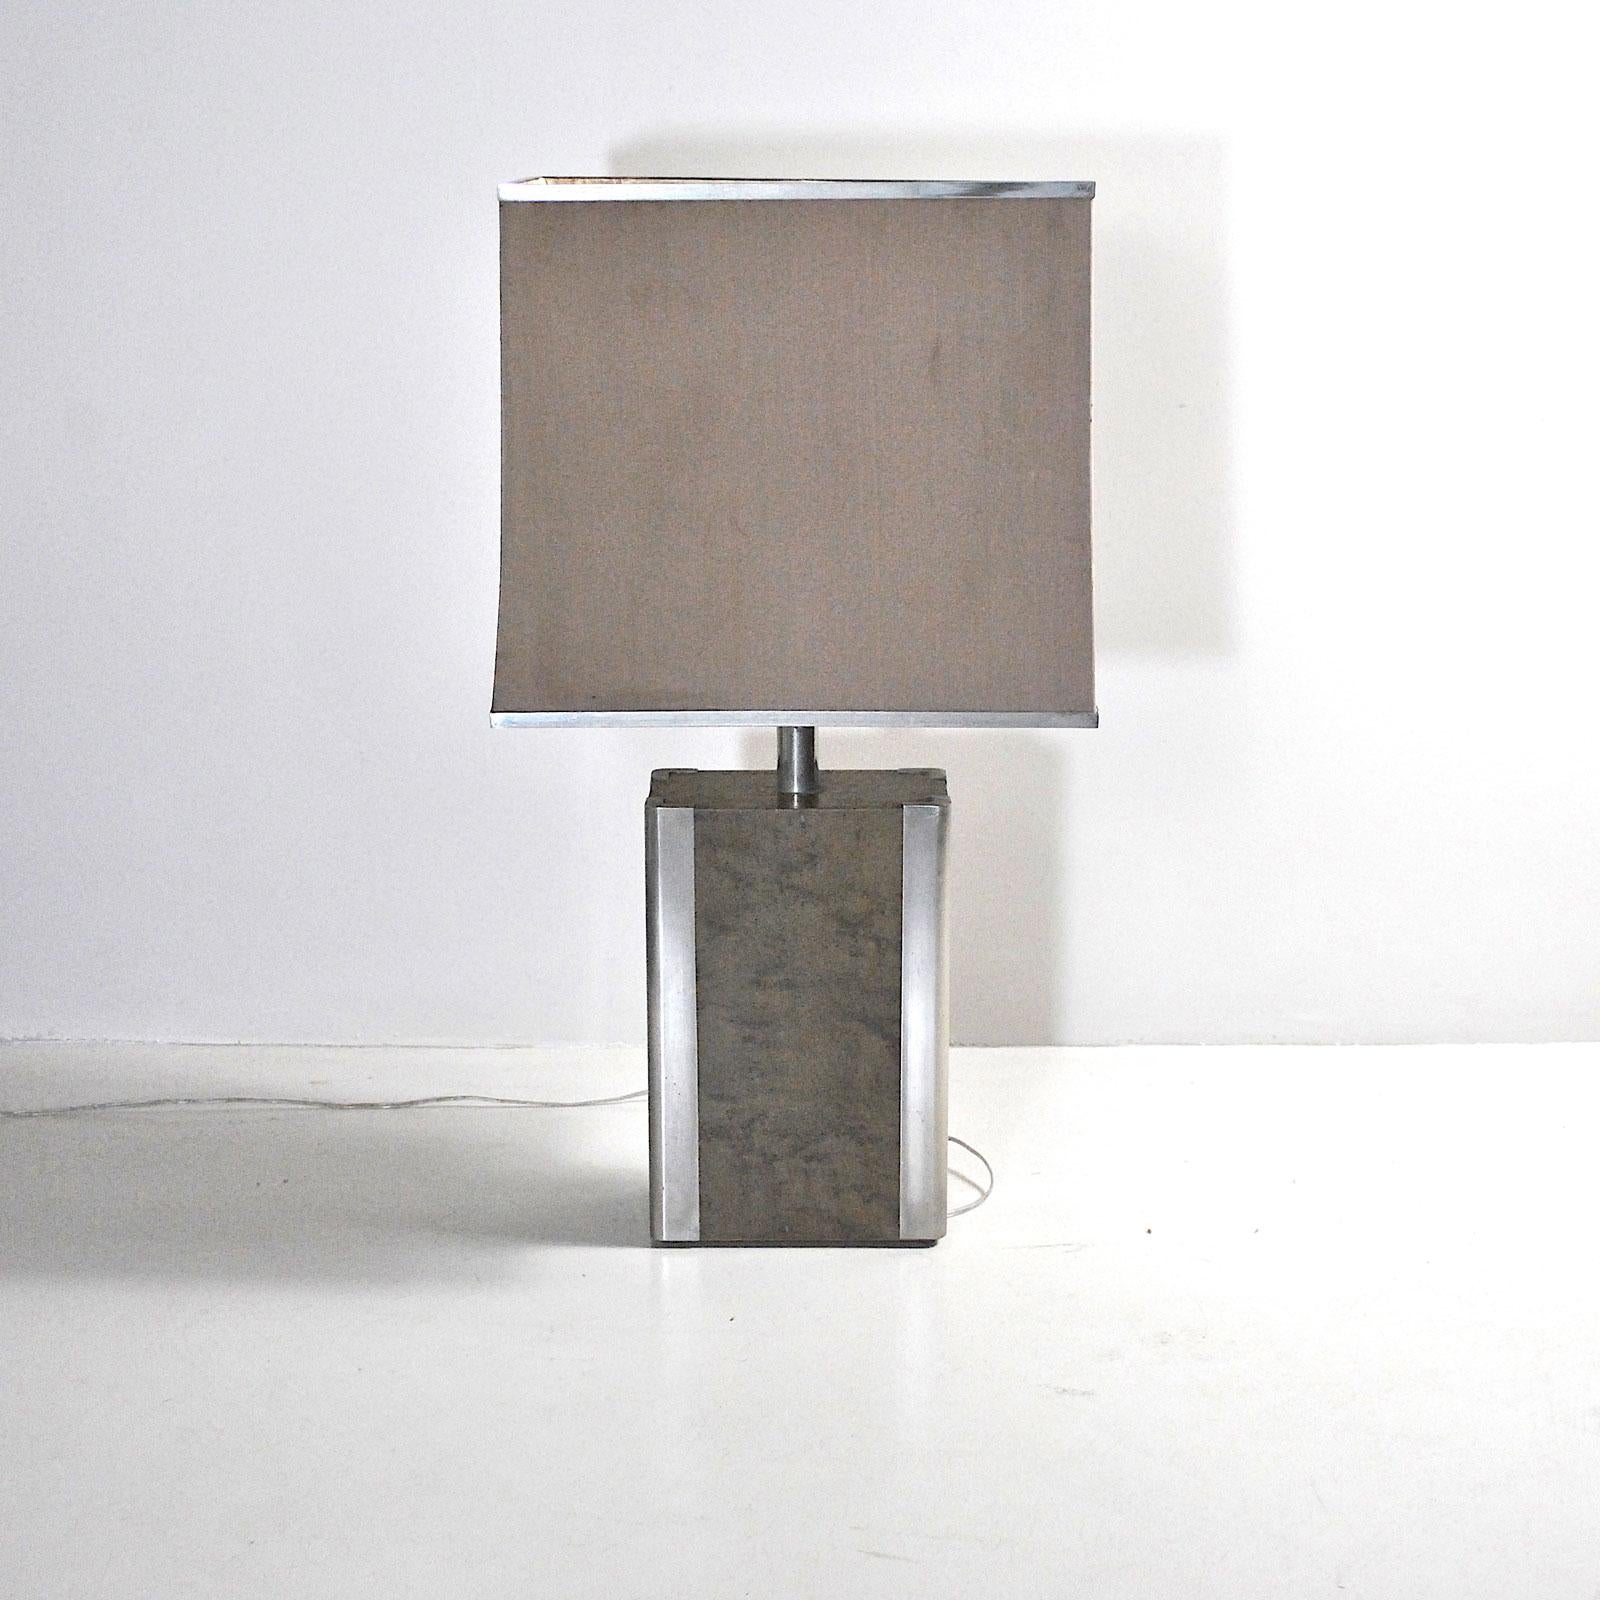 An Italian table lamp in steel an wood from the 1970s.
The lamp has no defects but only its patina
The lamp is sold without the lampshade in the picture, but it can be requested in the form, sizes and colors at will with an extra price.